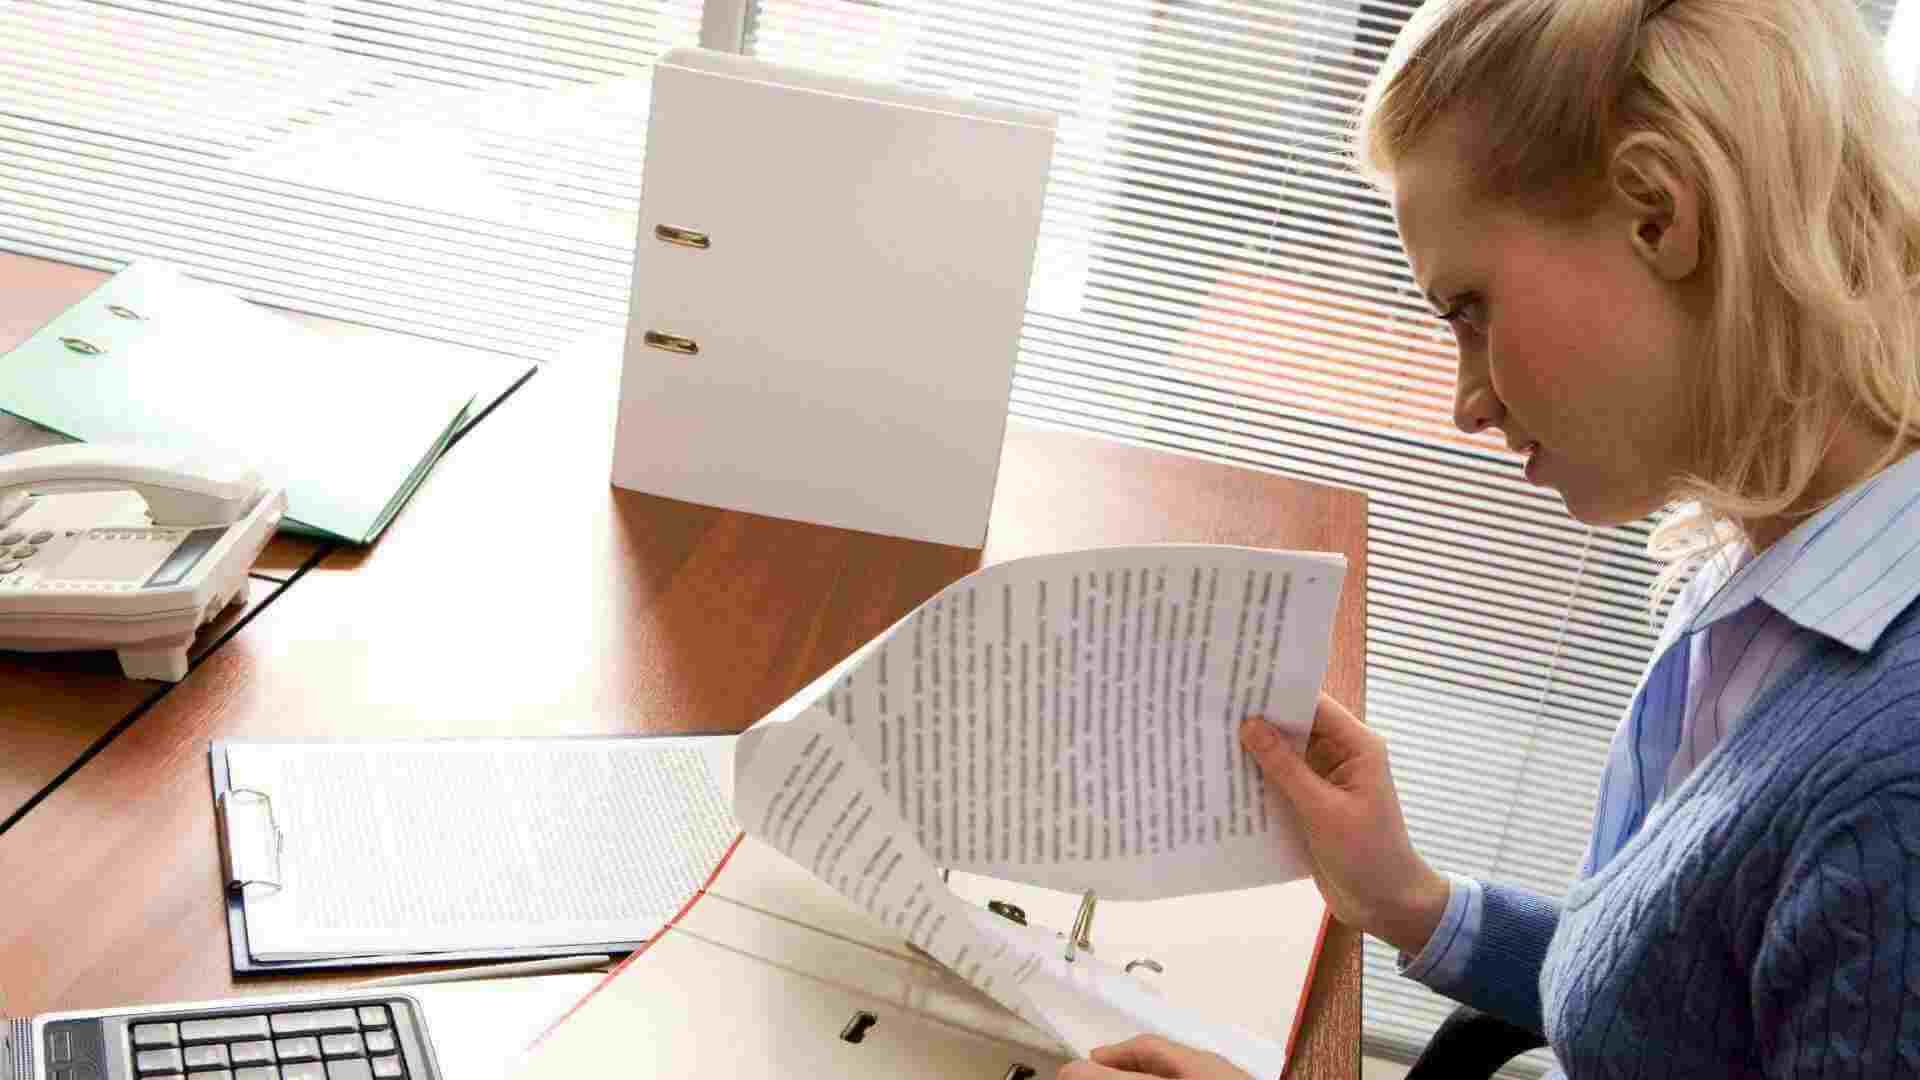 A blonde legal professional in a navy sweater and collared shirt going through the paperwork for an eviction notice in Texas.